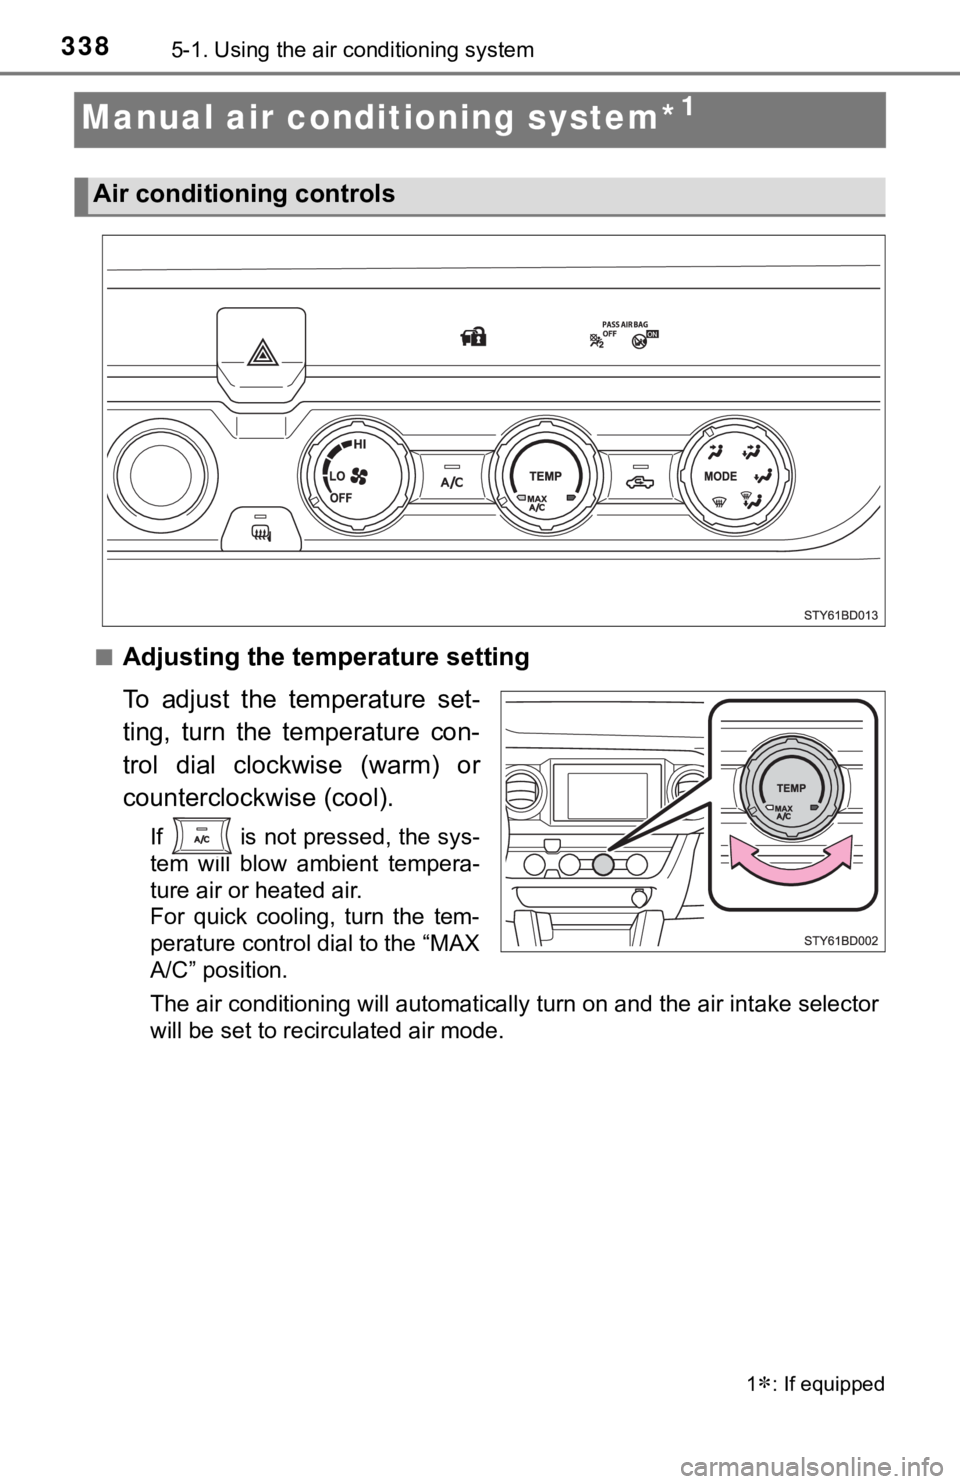 TOYOTA TACOMA 2022  Owners Manual 3385-1. Using the air conditioning system
Manual air conditioning system*1
■Adjusting the temperature setting
To  adjust  the  temperature  set-
ting,  turn  the  temperature  con-
trol  dial  clock